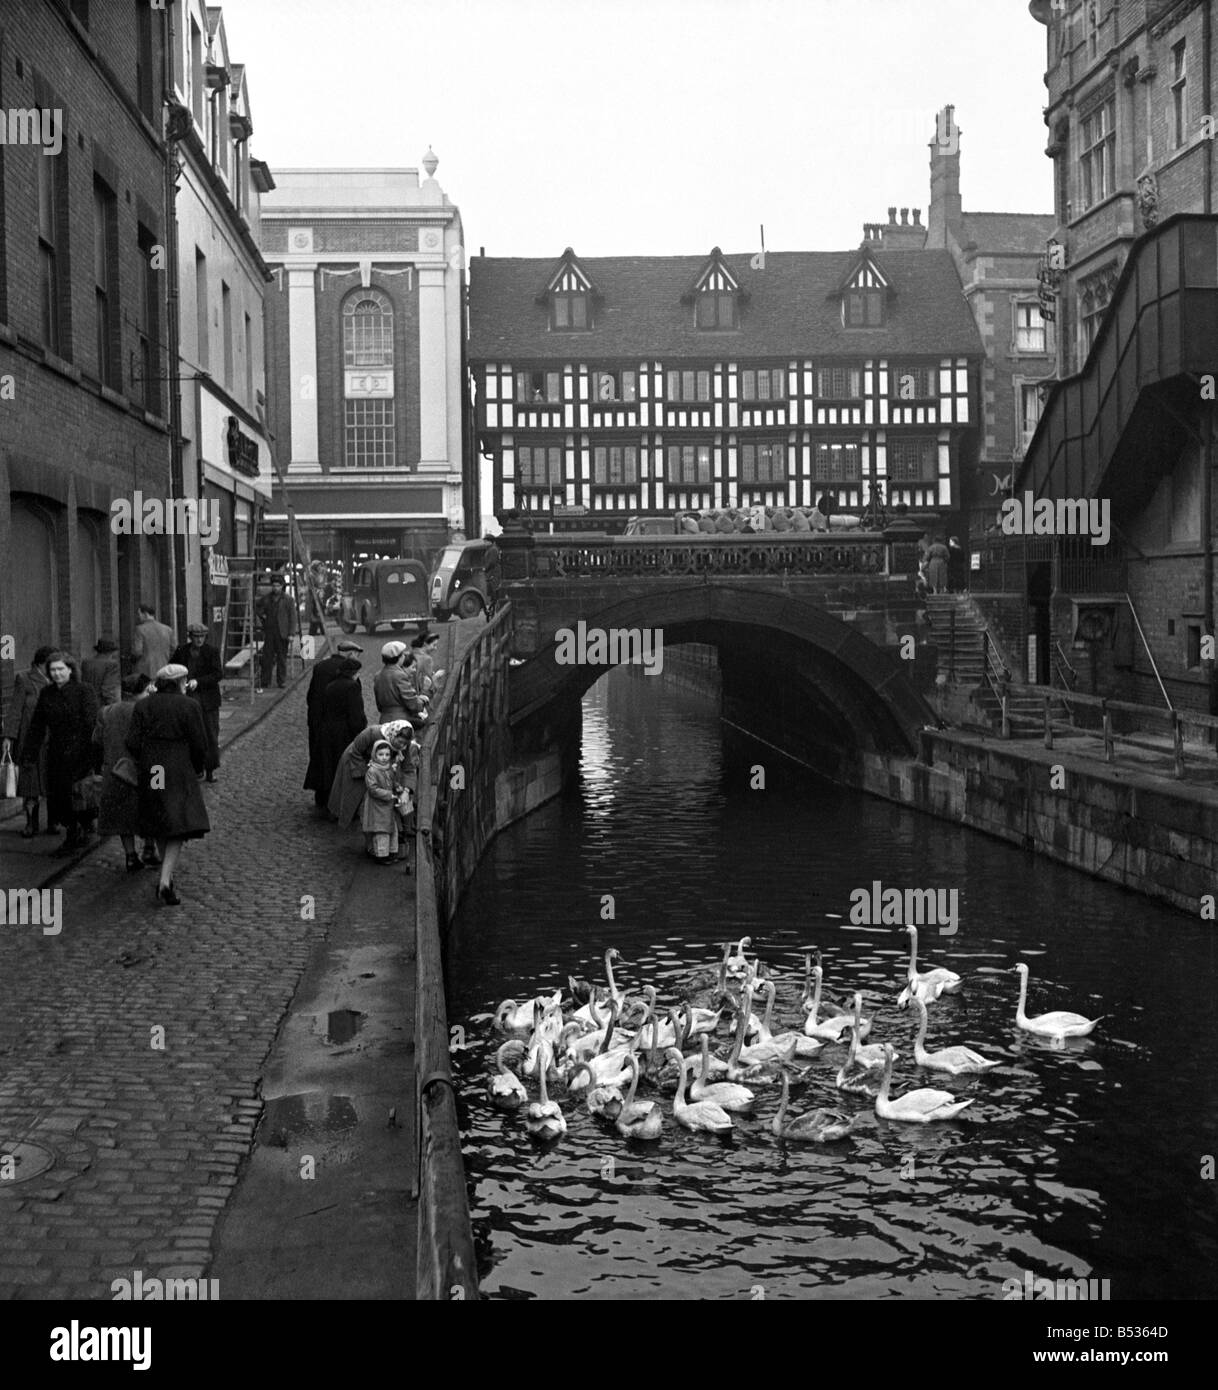 Lincoln - The High Bridge carries Lincoln's High Street over the River Witham. Incorporated in its structure are the stone ribs Stock Photo